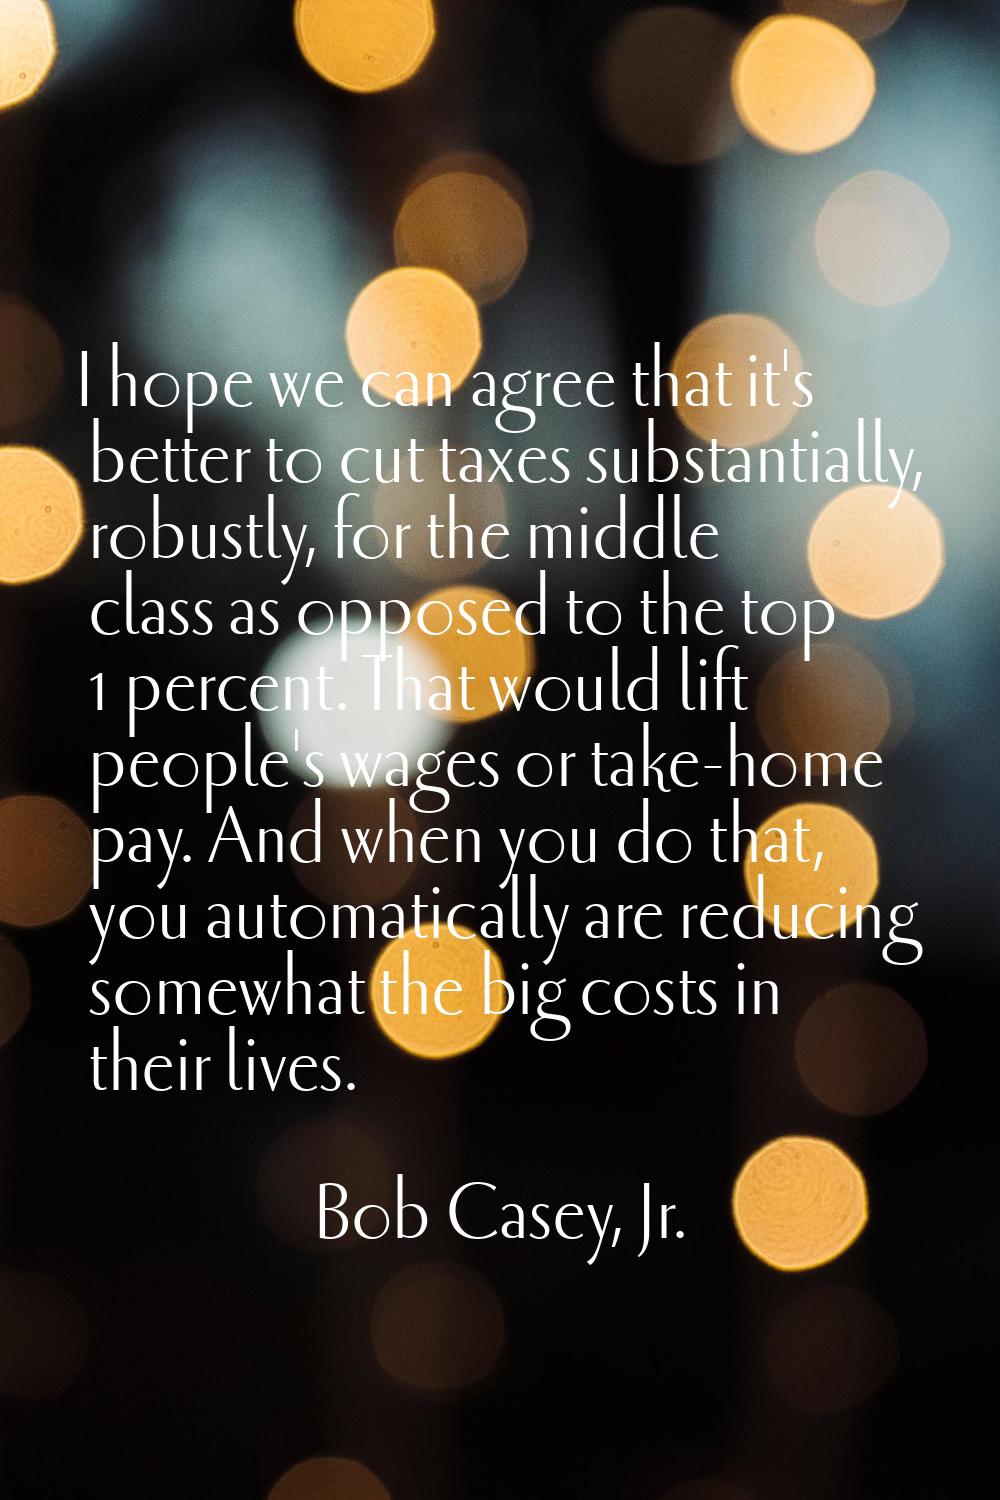 I hope we can agree that it's better to cut taxes substantially, robustly, for the middle class as 